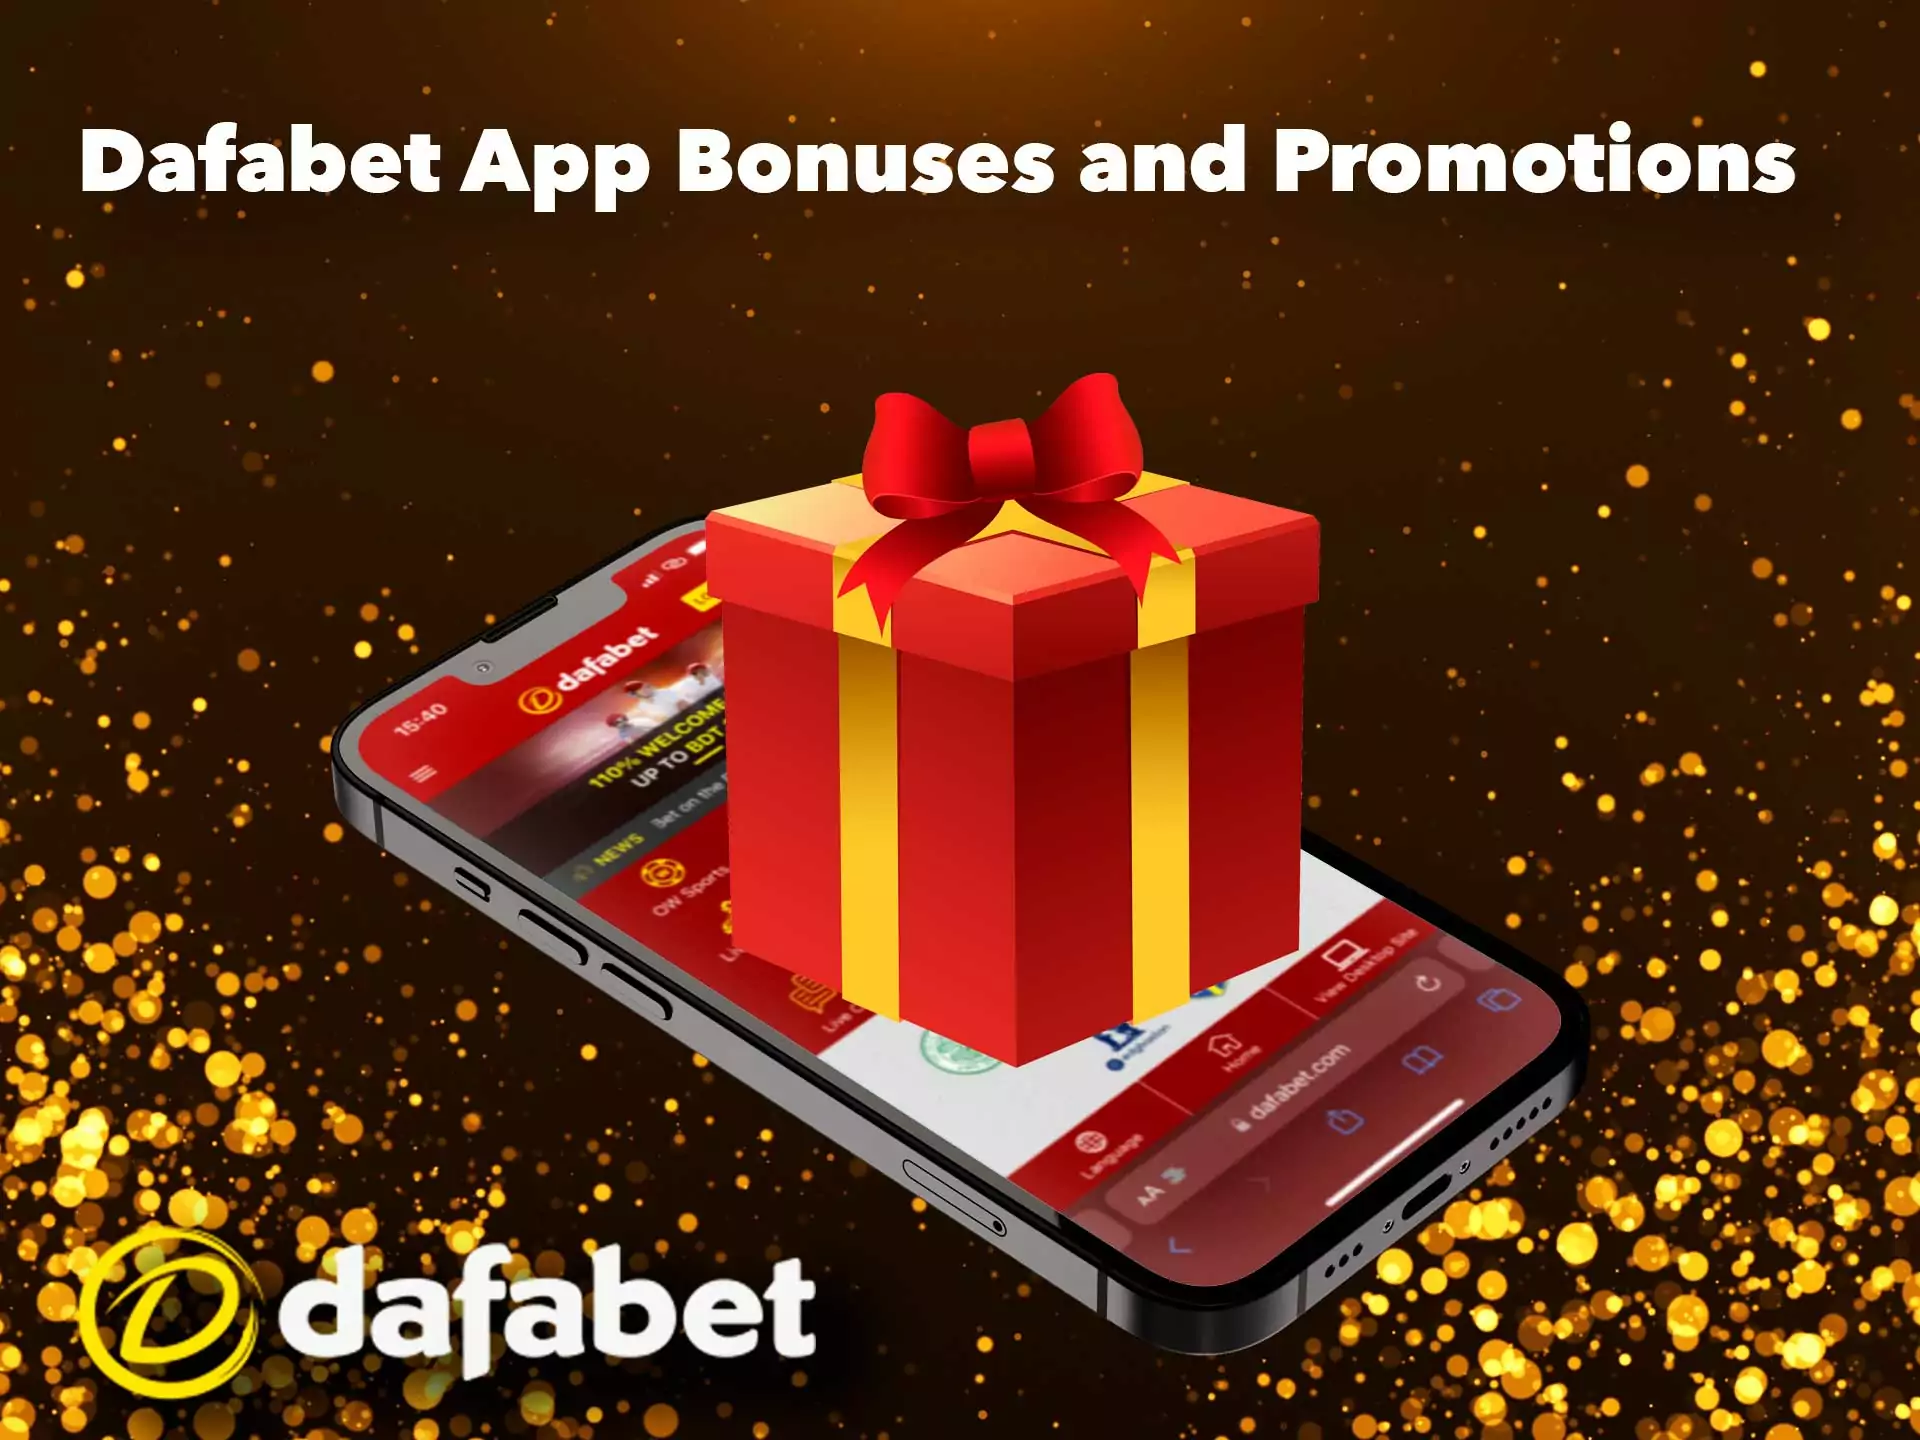 15 bonuses and promotions, everyone will find something useful in Dafabet.